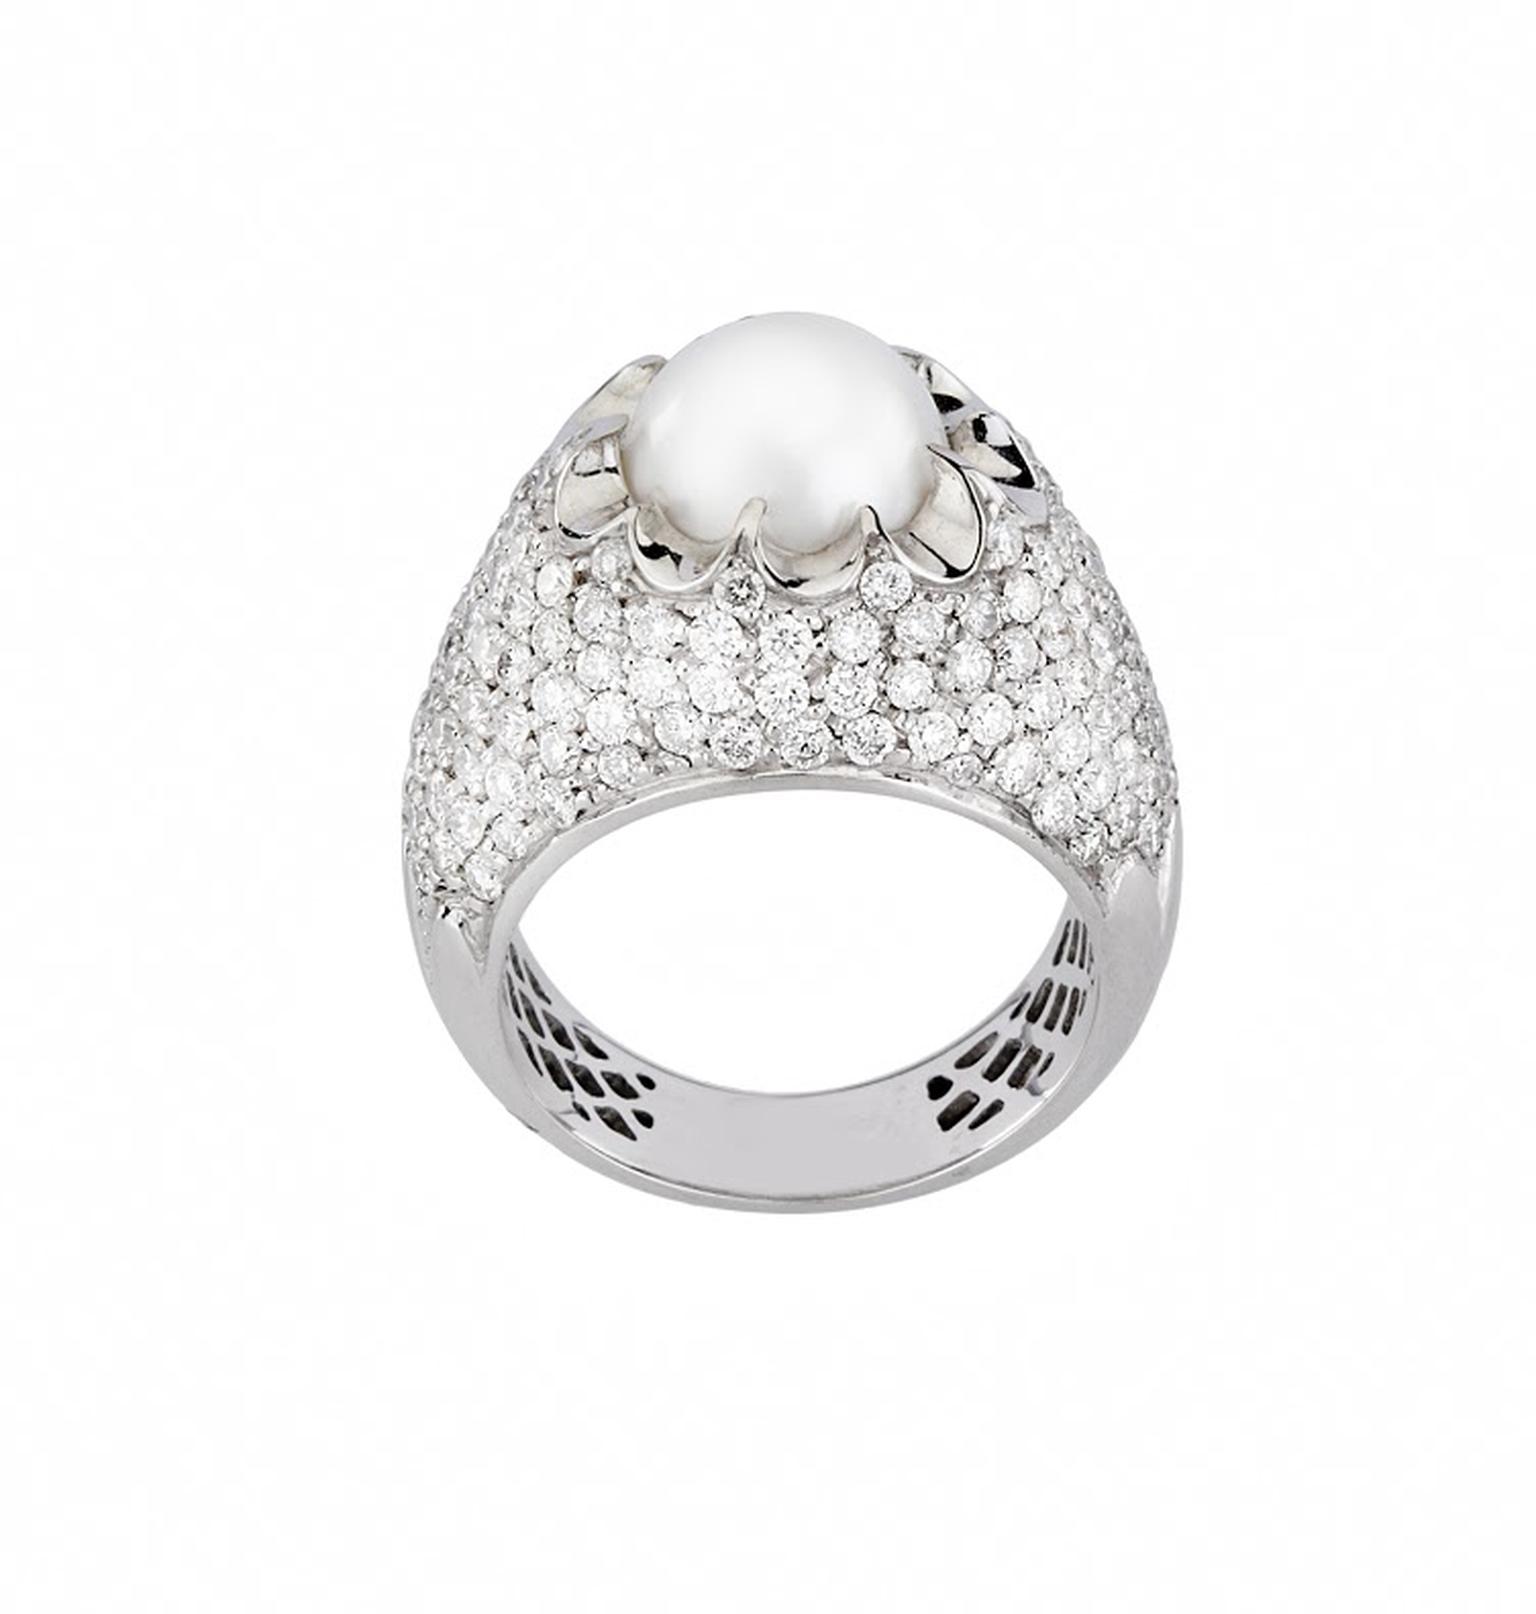 Mimata Corona diamond ring in white gold, set with a South Sea pearl, from the Stars collection.